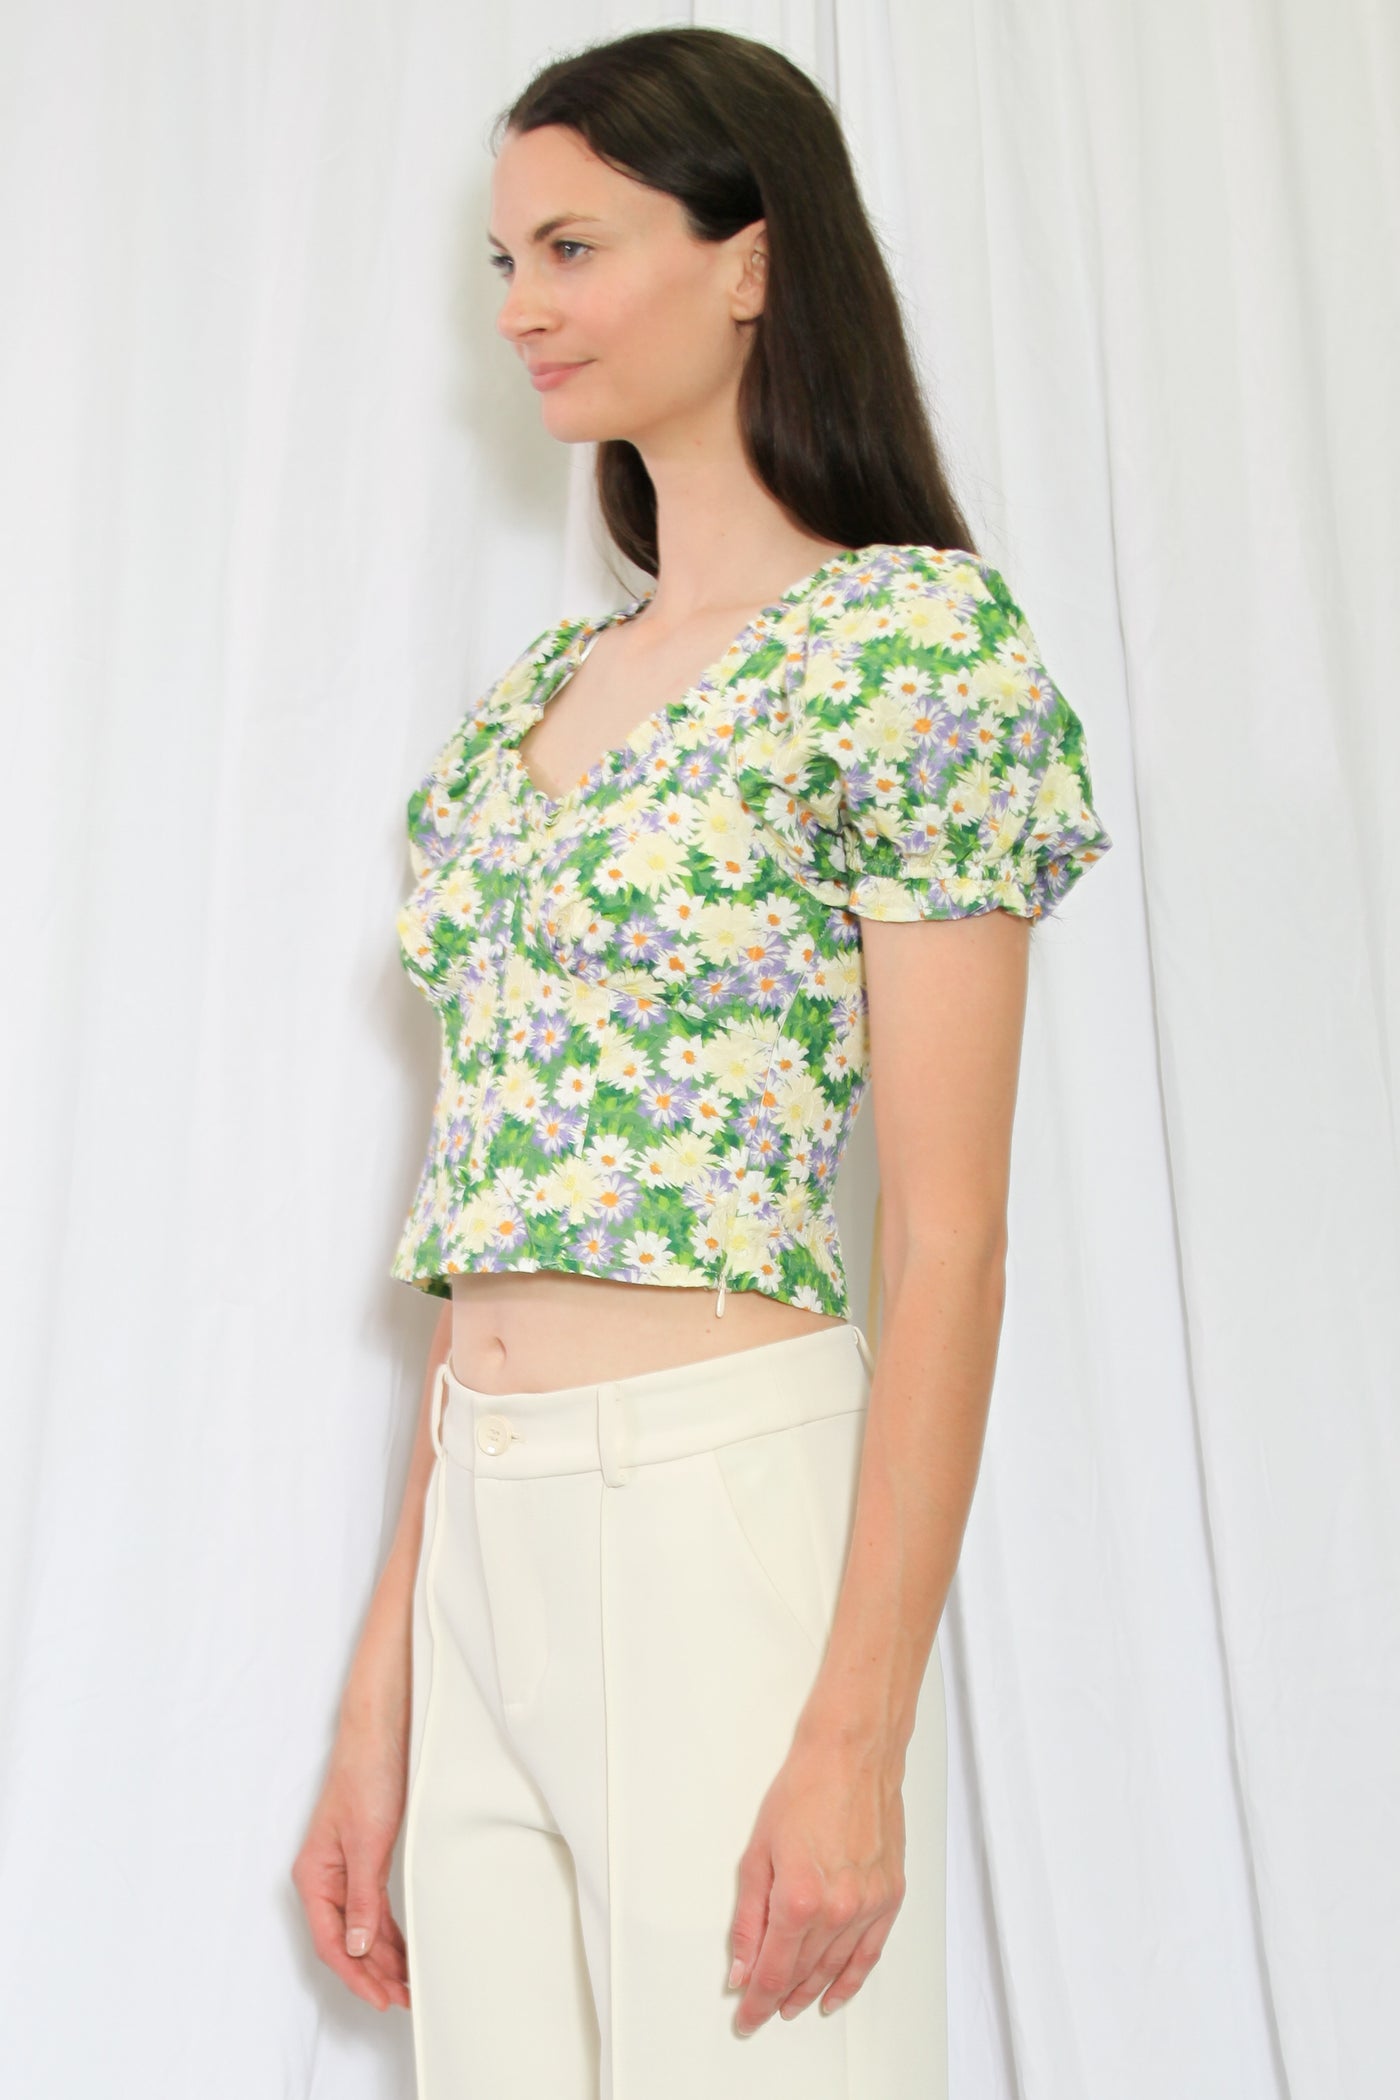 Green Floral Printed Cotton Top